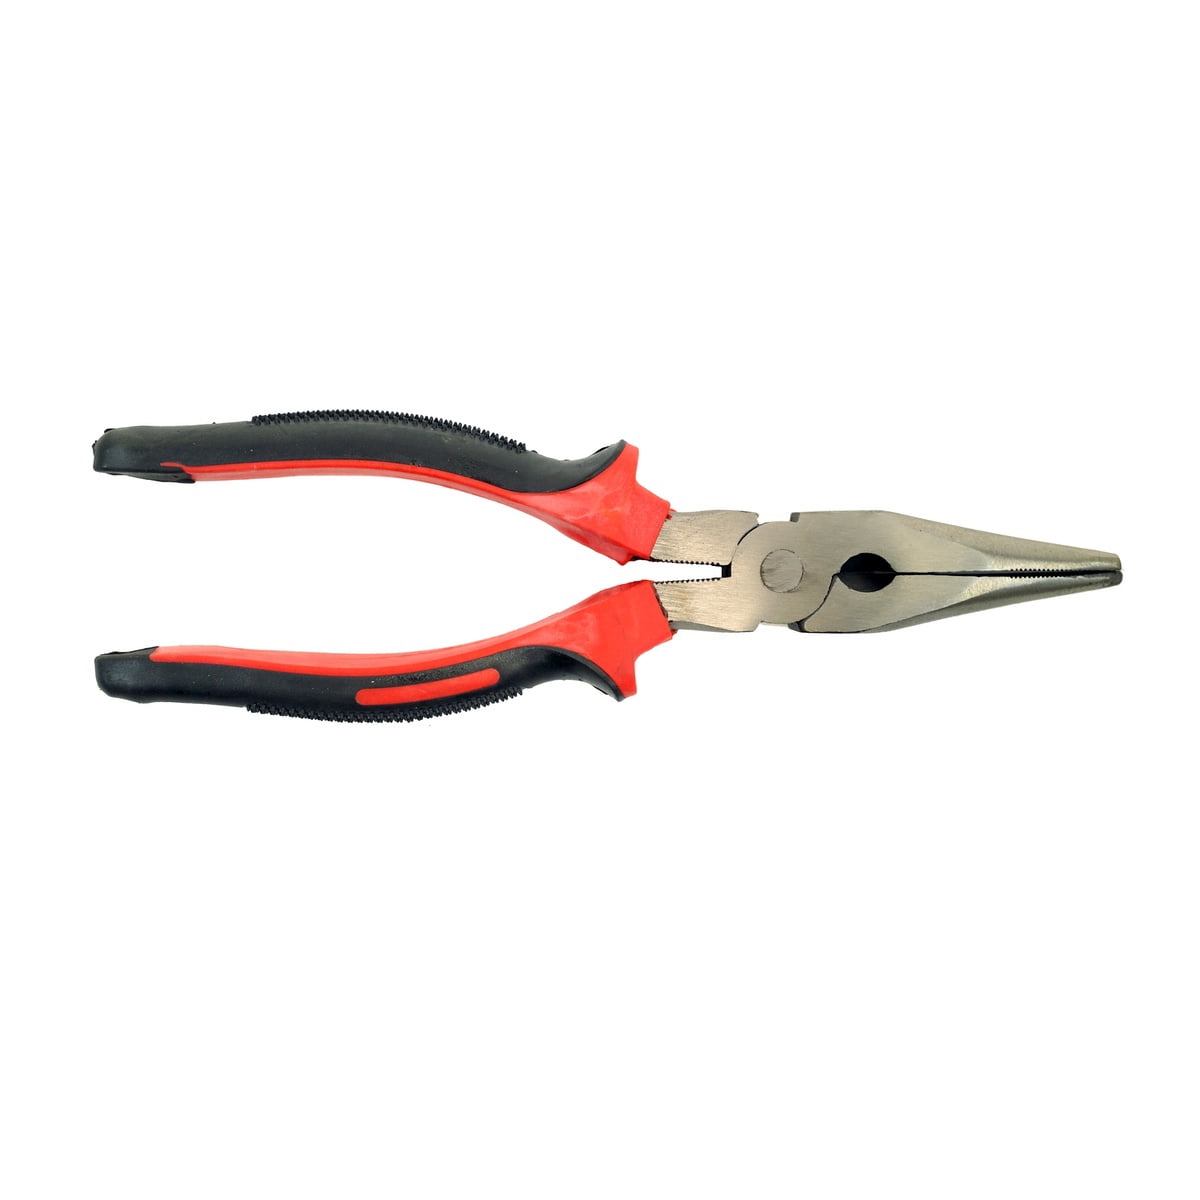 Craftsman 8 Long Needle-nose Pliers Wire Cutters TruGrip Insulated  LIFETIME WAR